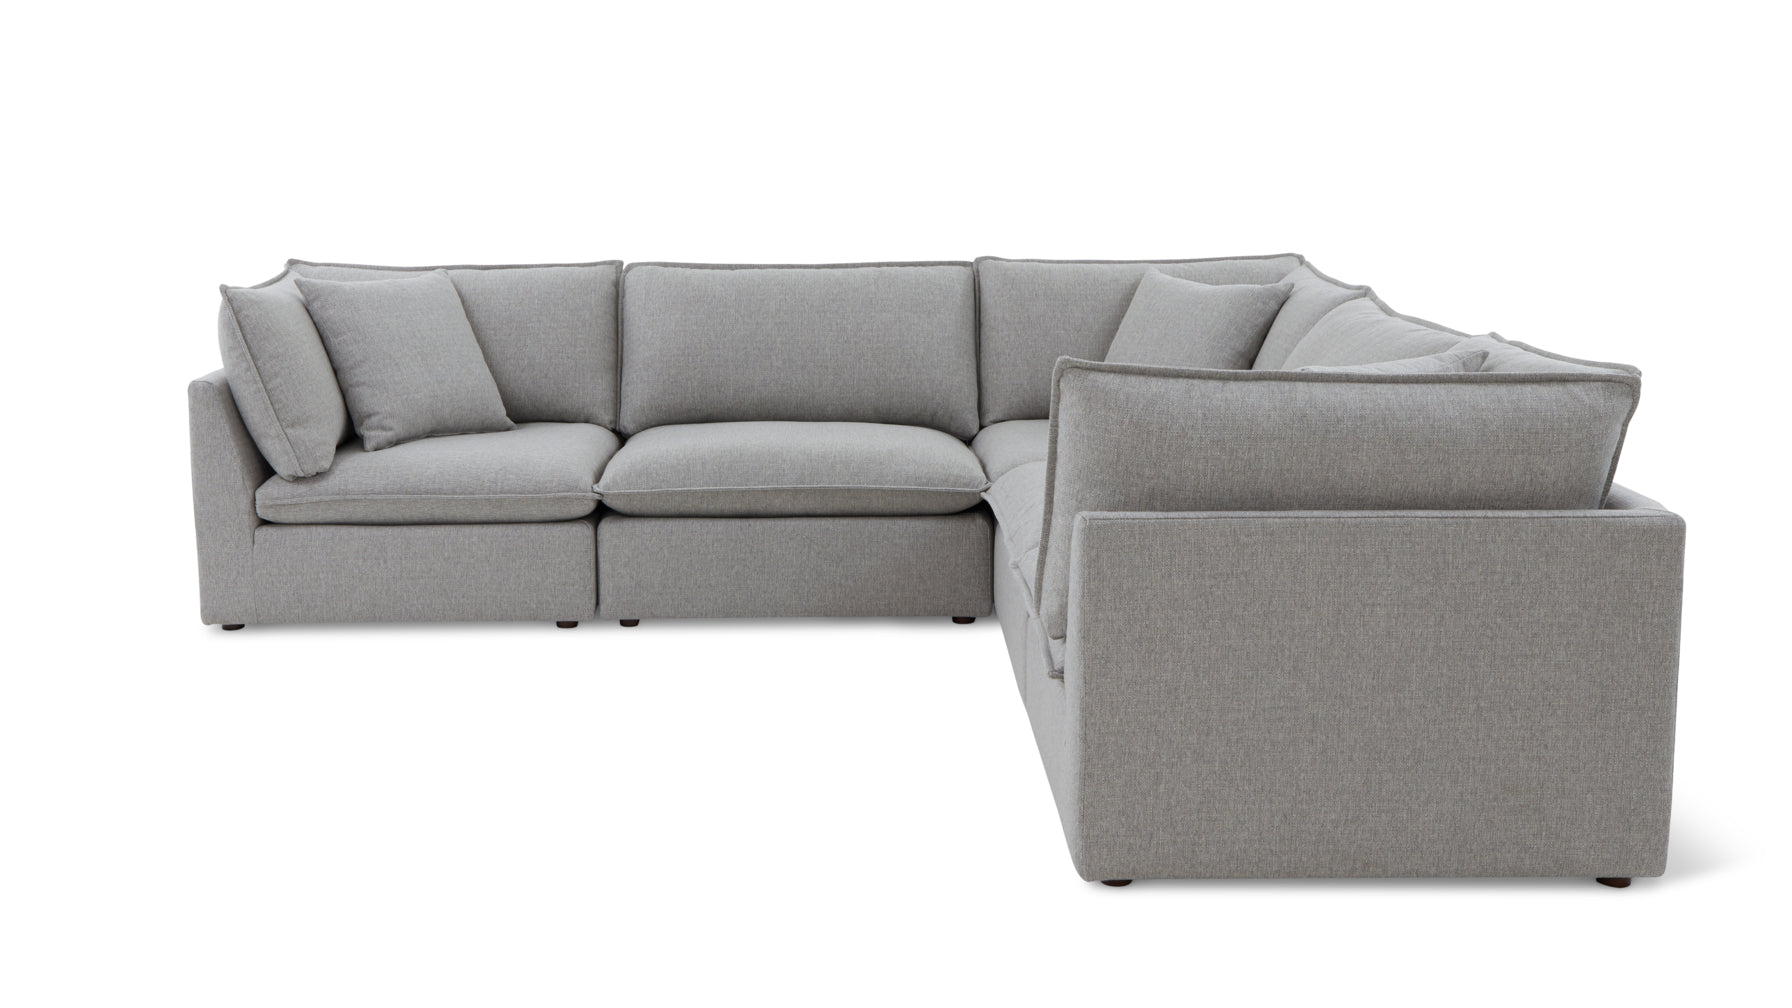 Chill Time 5-Piece Modular Sectional Closed, Heather - Image 1